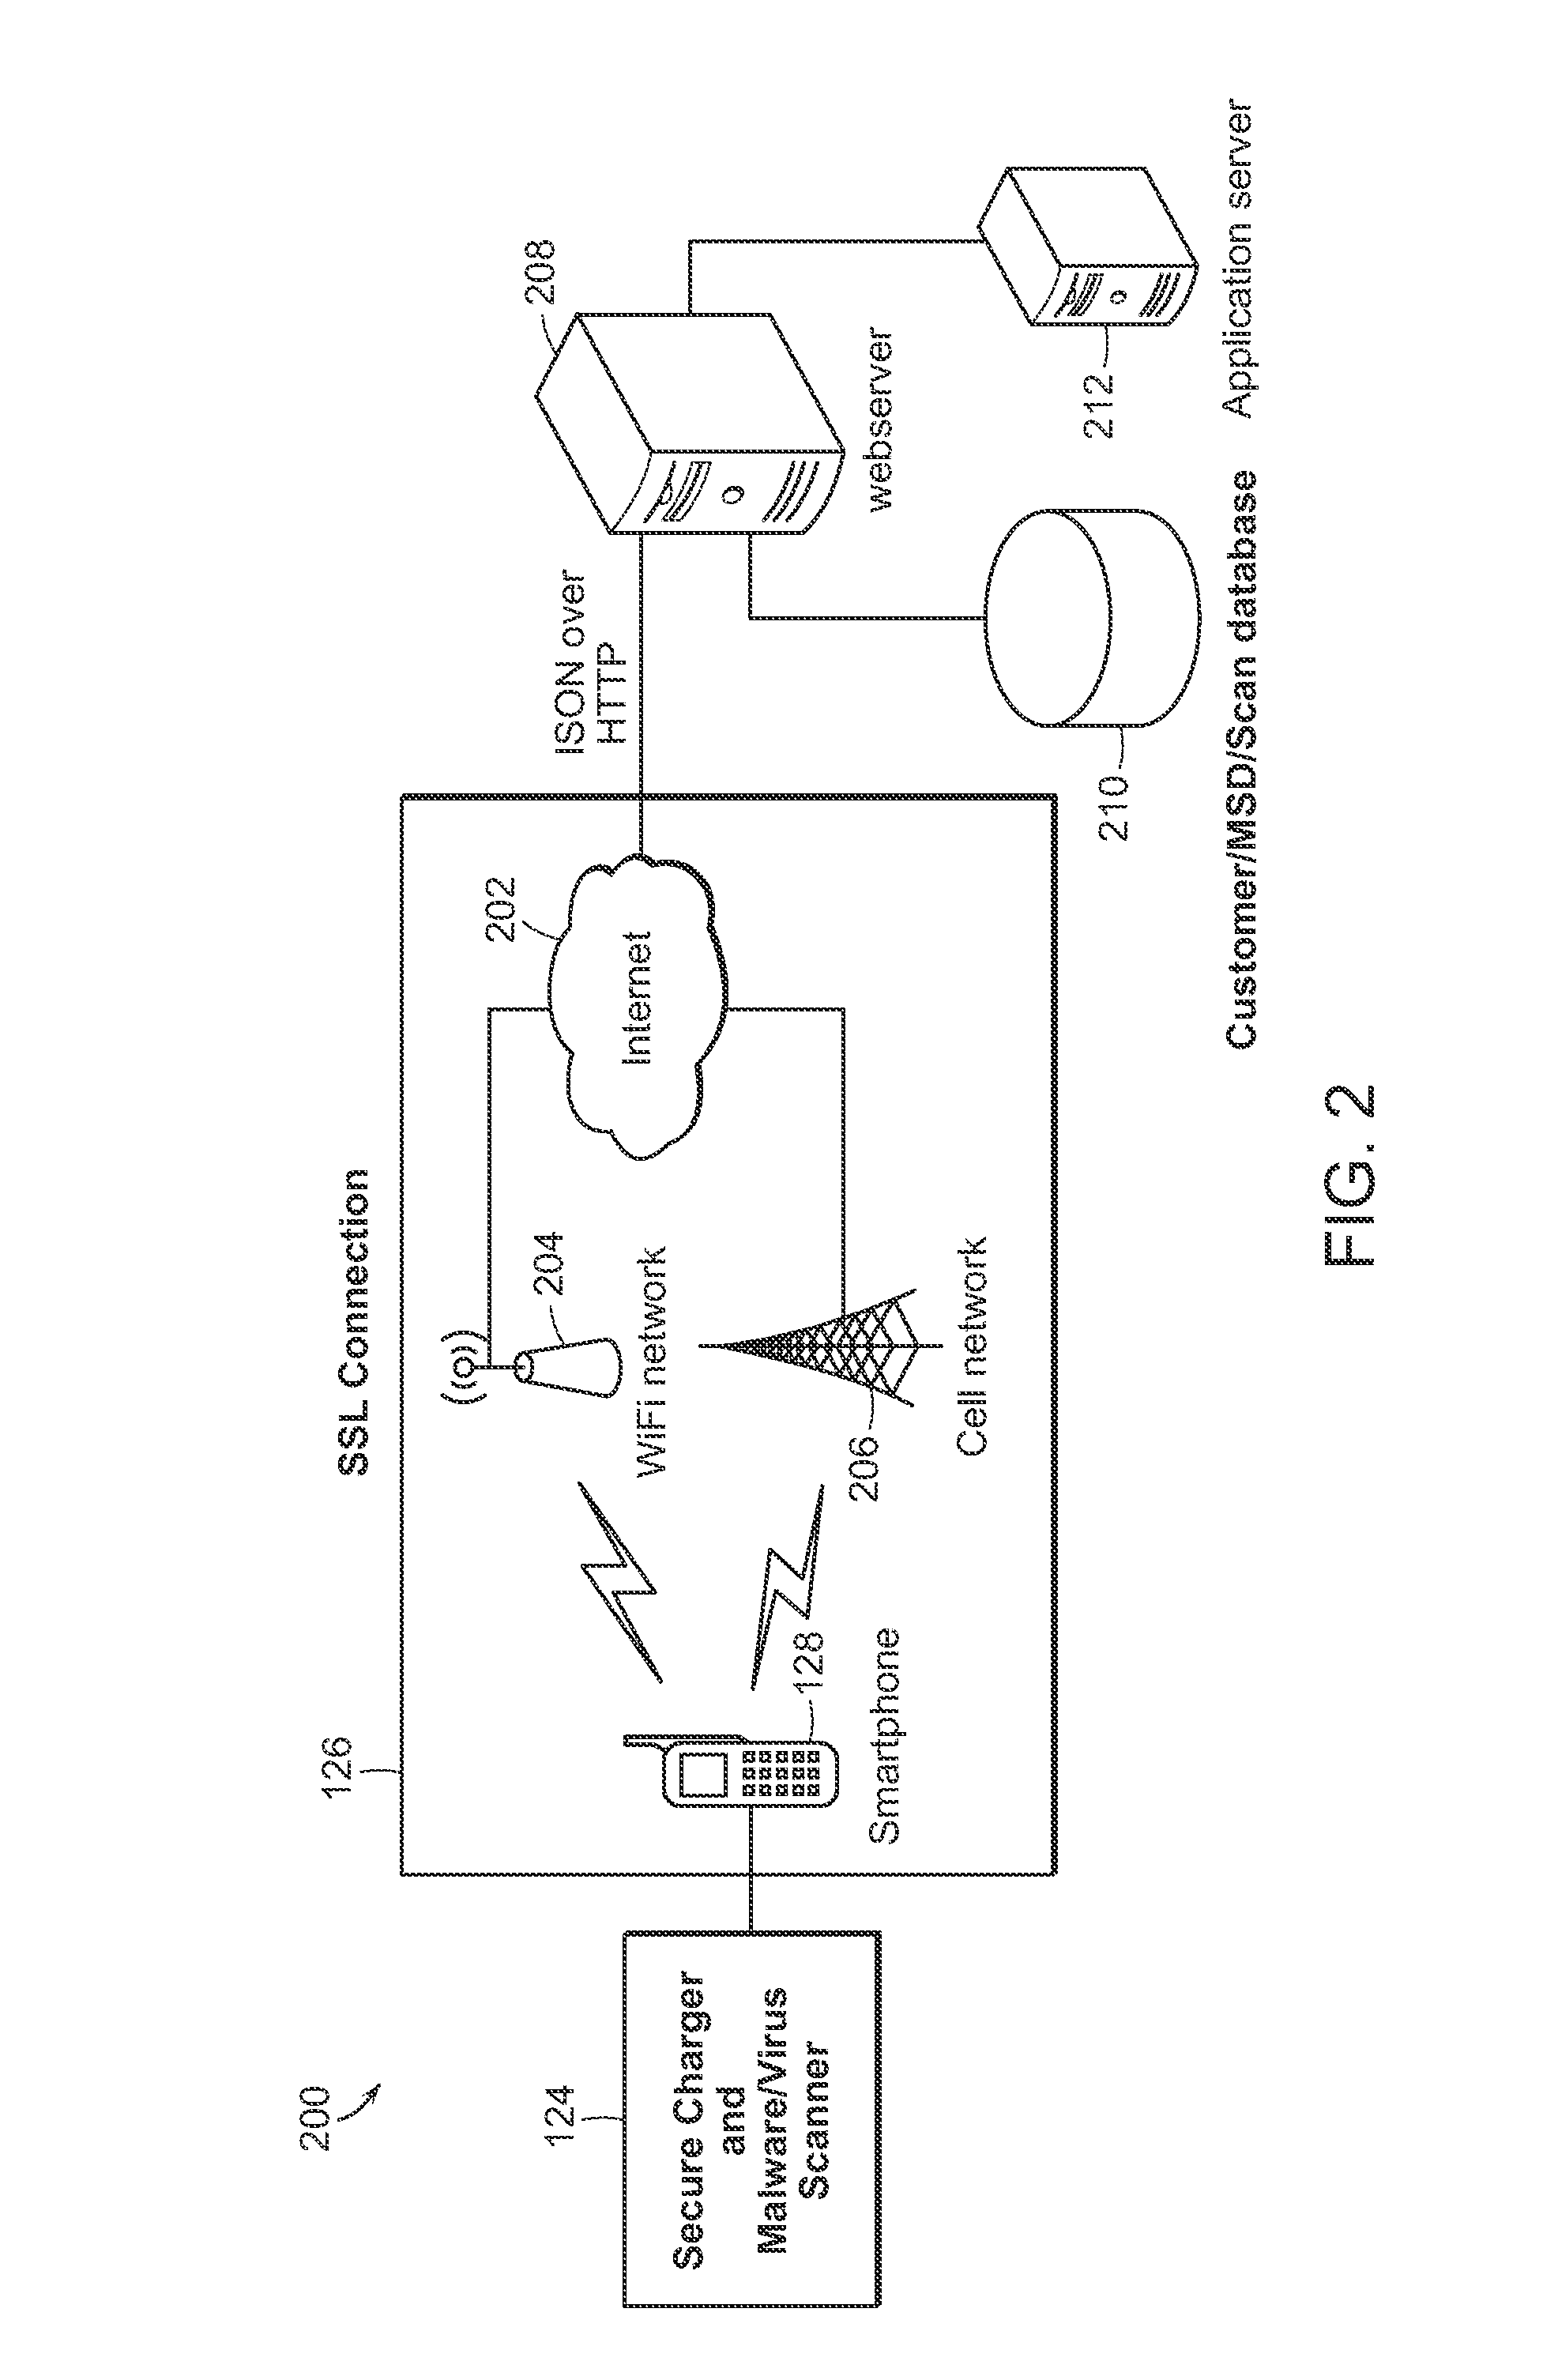 System and Method for Bidirectional Trust Between Downloaded Applications and Mobile Devices Including a Secure Charger and Malware Scanner